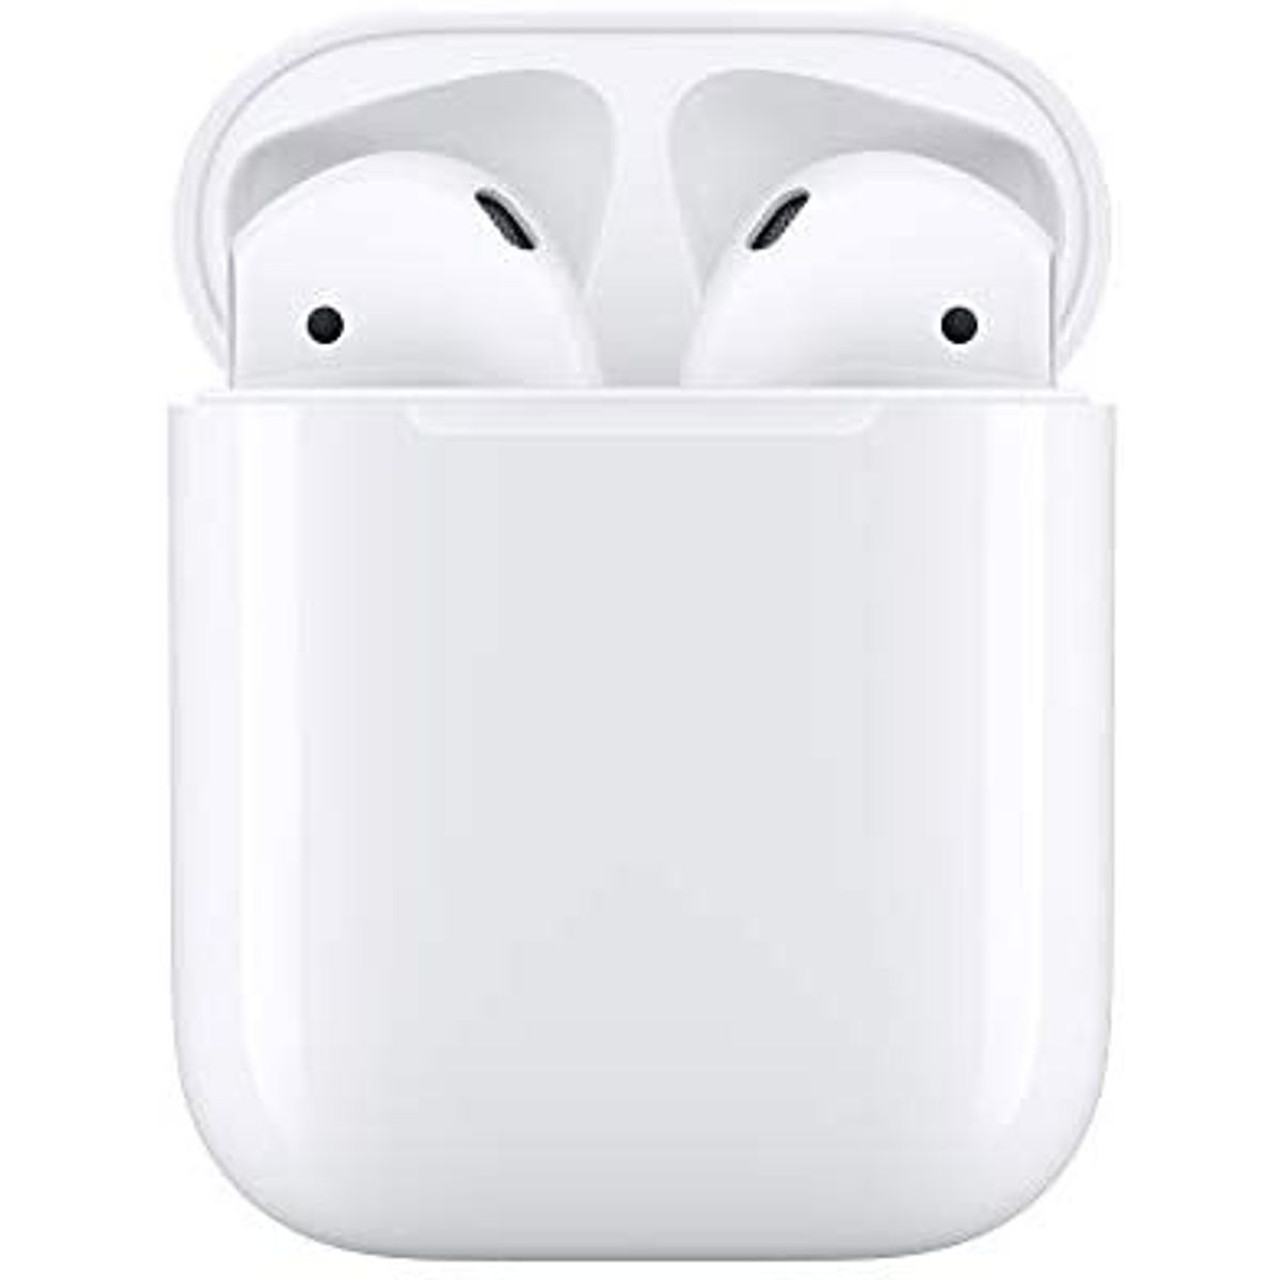 Apple AirPods with Charging Case - 2nd Generation product image